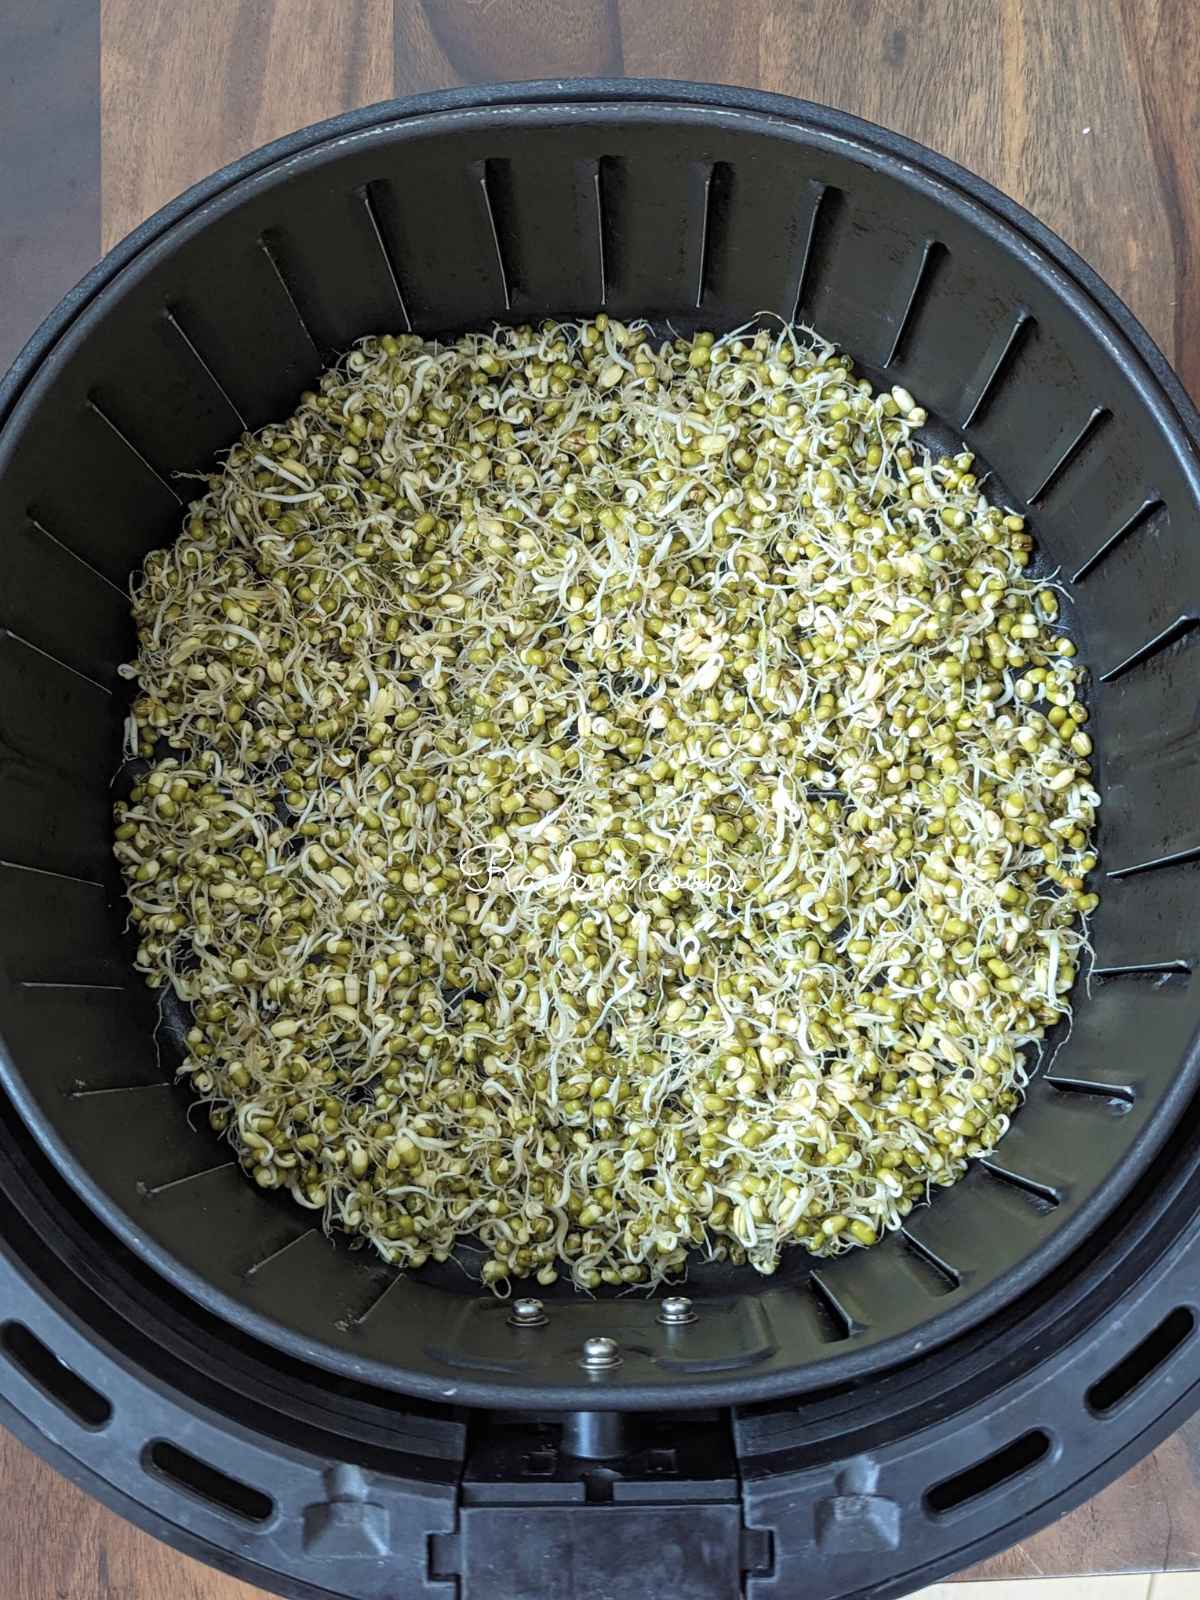 Moong sprouts tossed with oil in air fryer basket